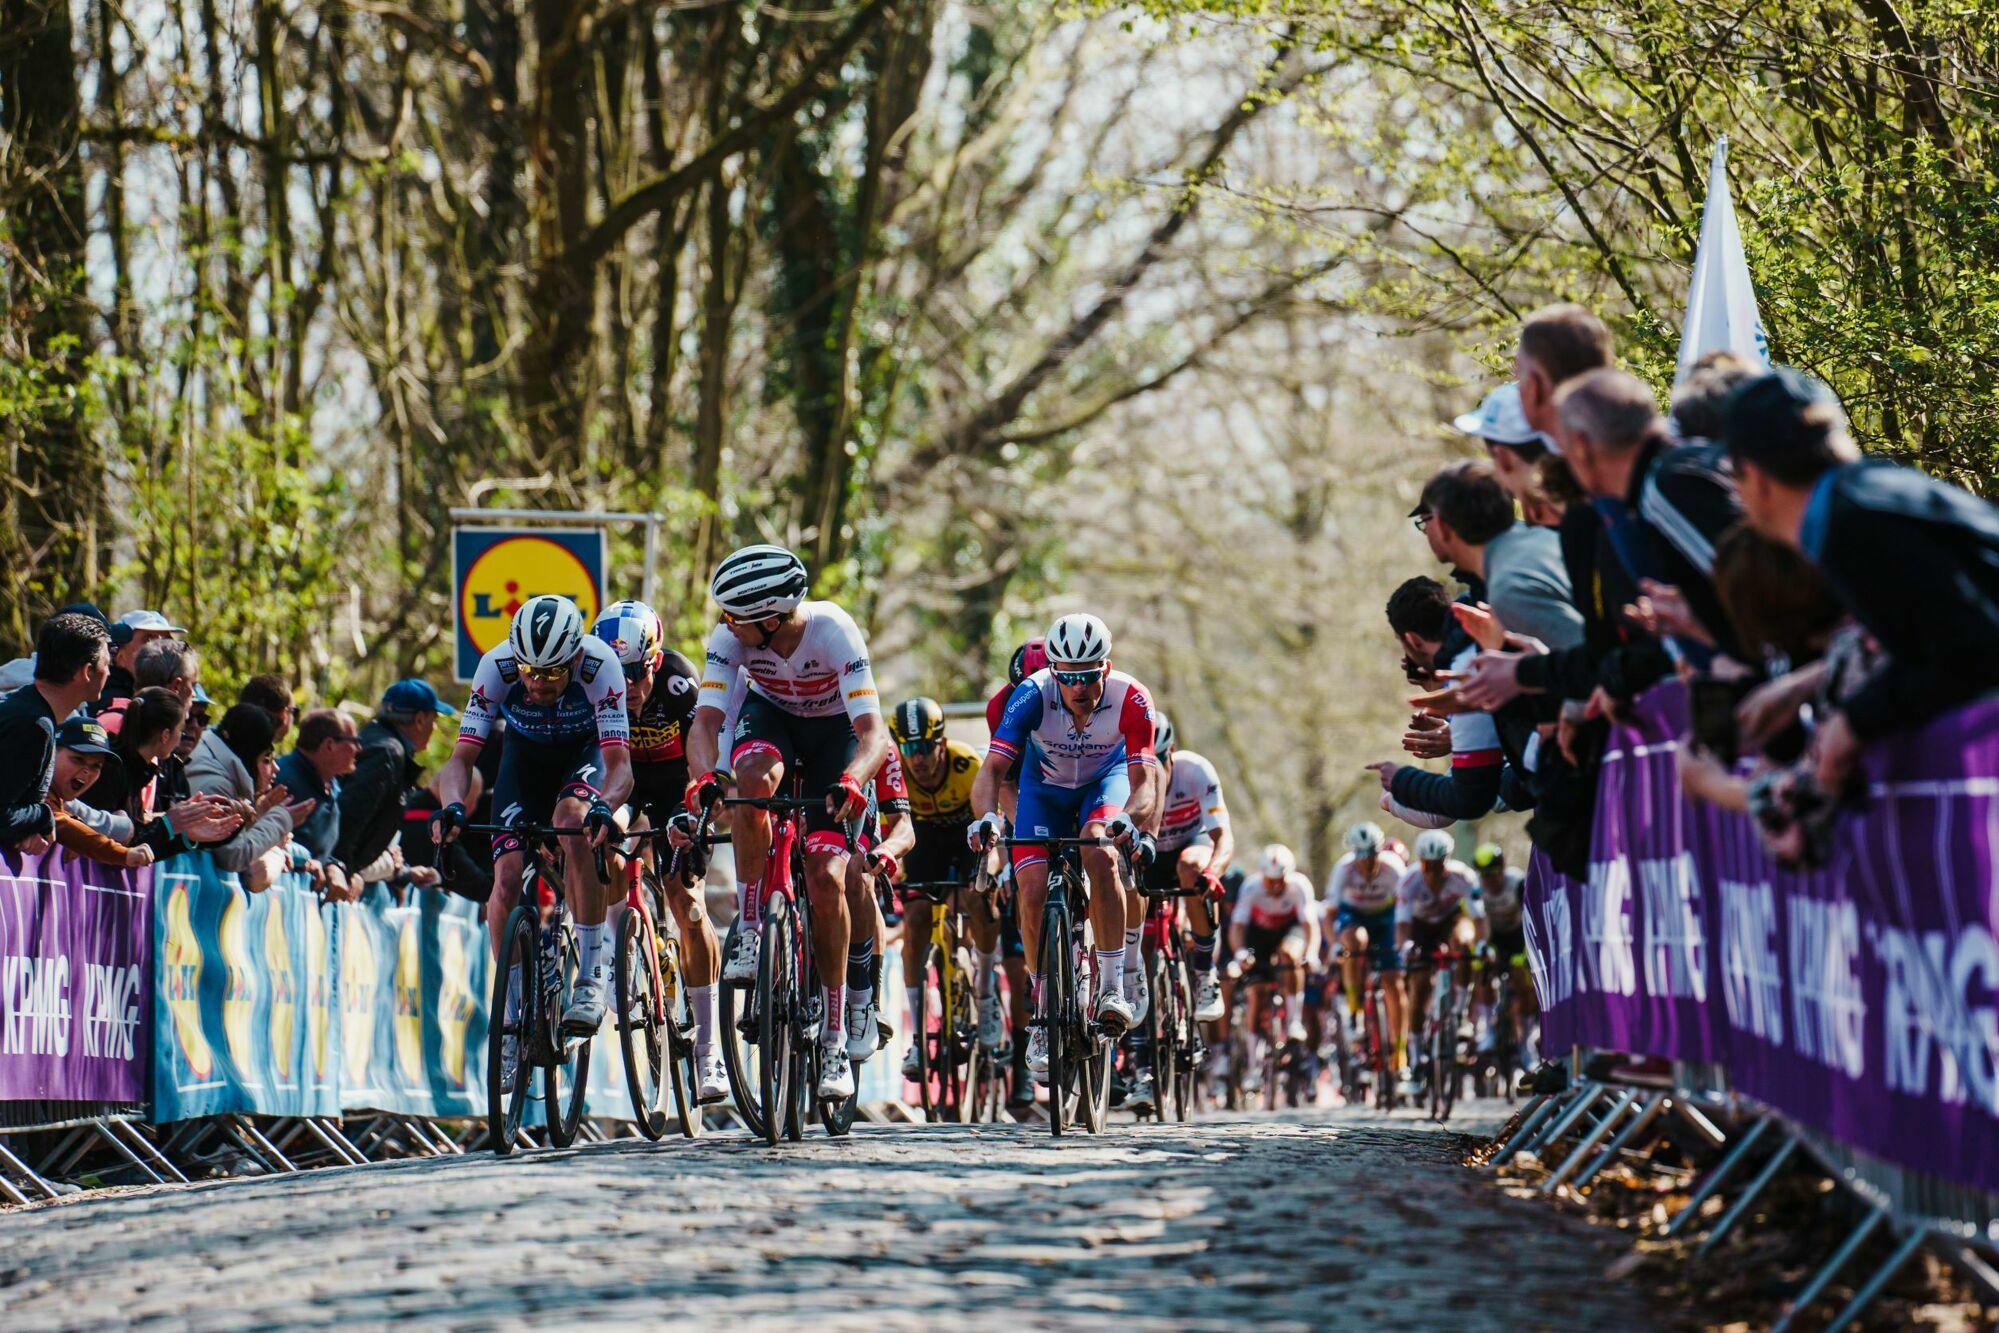 Who will be writing history in Wevelgem this year?